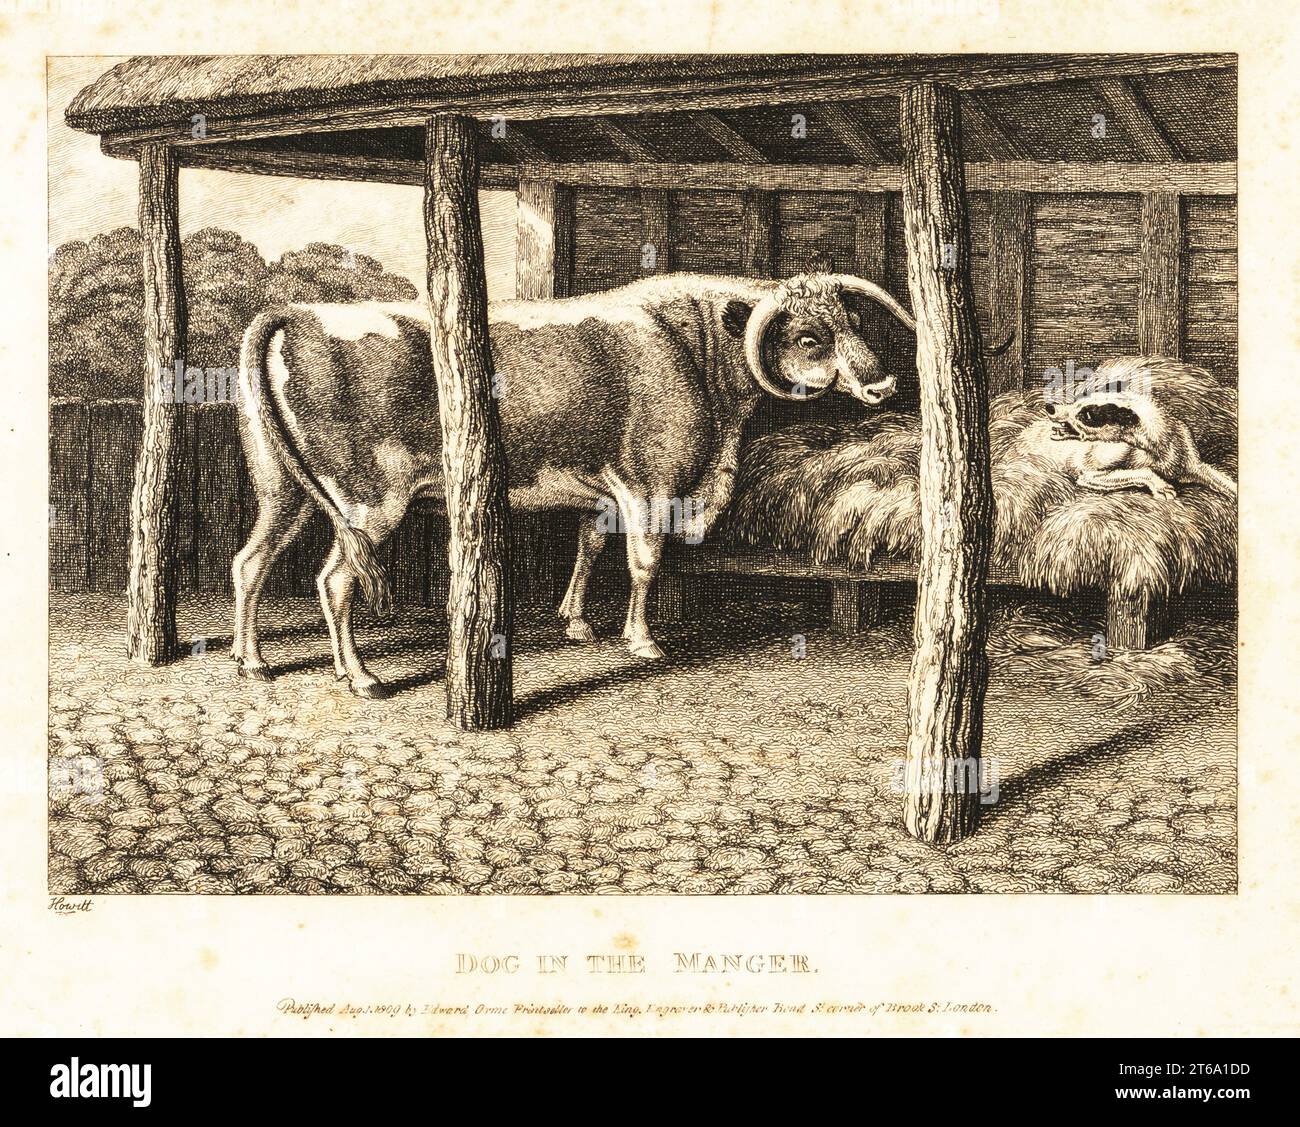 A dog sleeping on hay in a barn snarls at a cow trying to eat. Dog in the manger. Illustration of a saying in the apocryphal Gospel of Thomas. Copperplate etching drawn and engraved from life by Samuel Howitt from his own A New Work of Animals, Principally Designed from the Fables of Aesop, Gay and Phaedrus, Edward Orme, London, 1811. Stock Photo